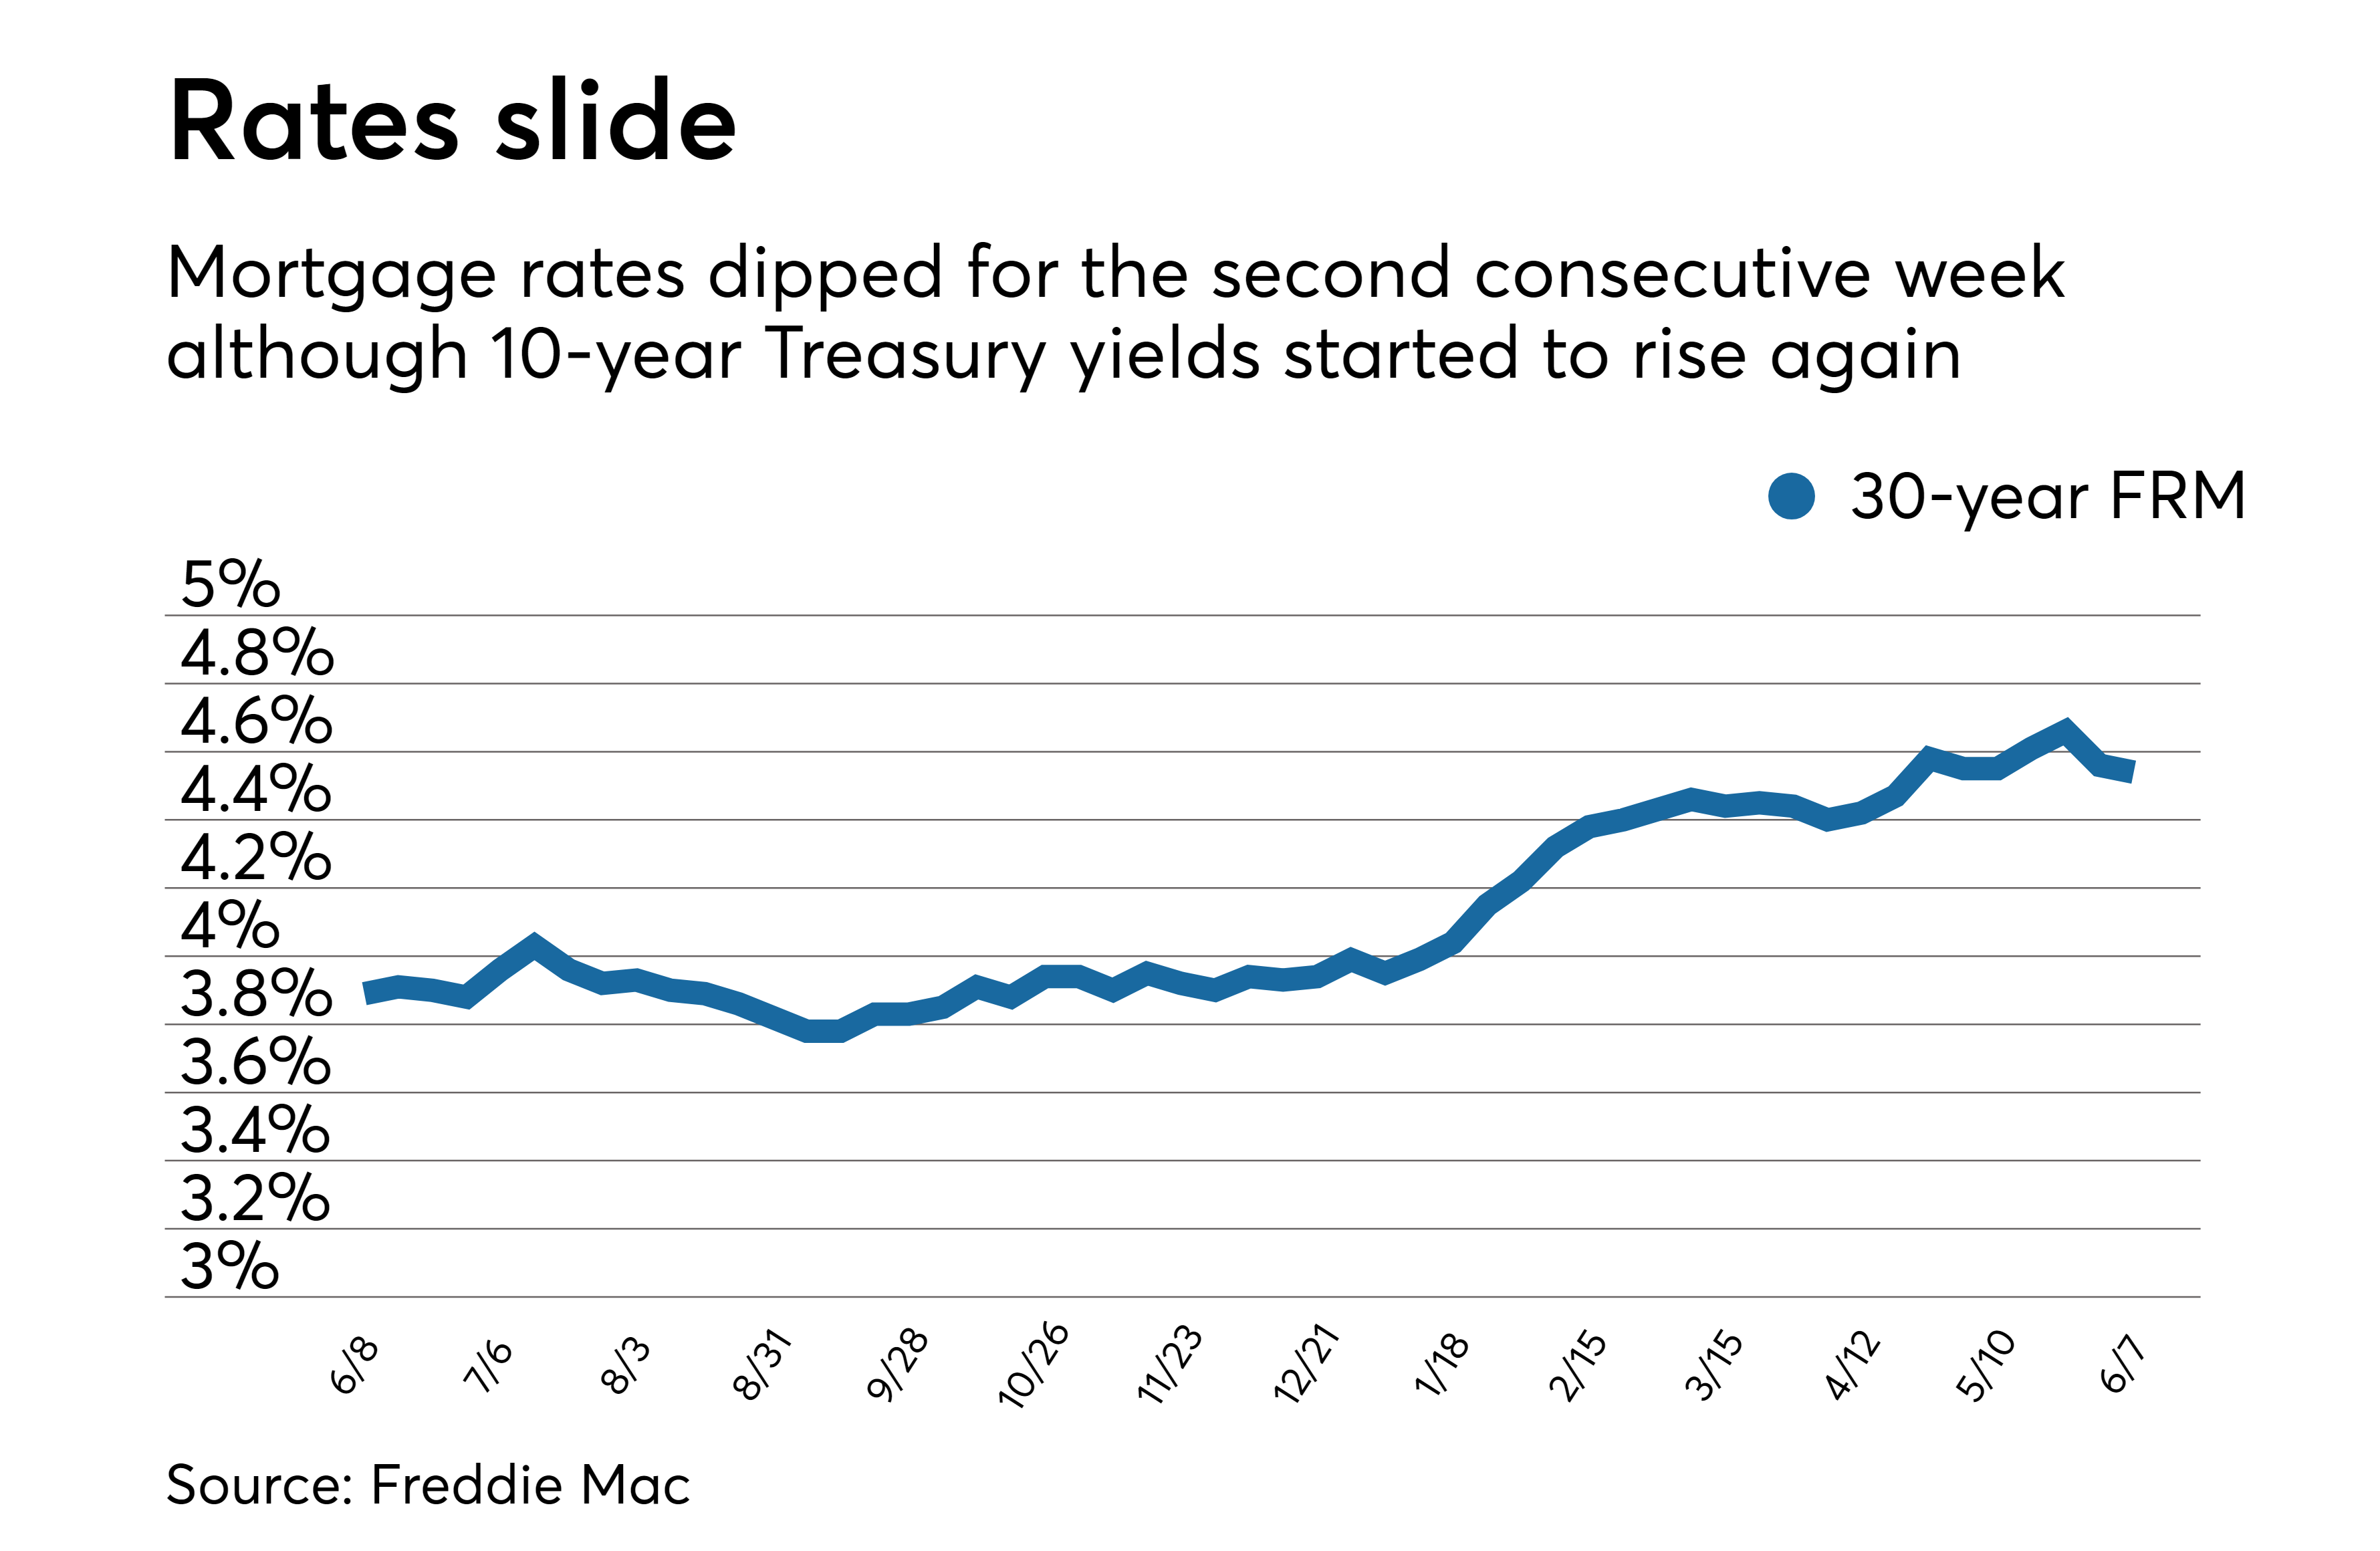 Average mortgage rates slide for second consecutive week